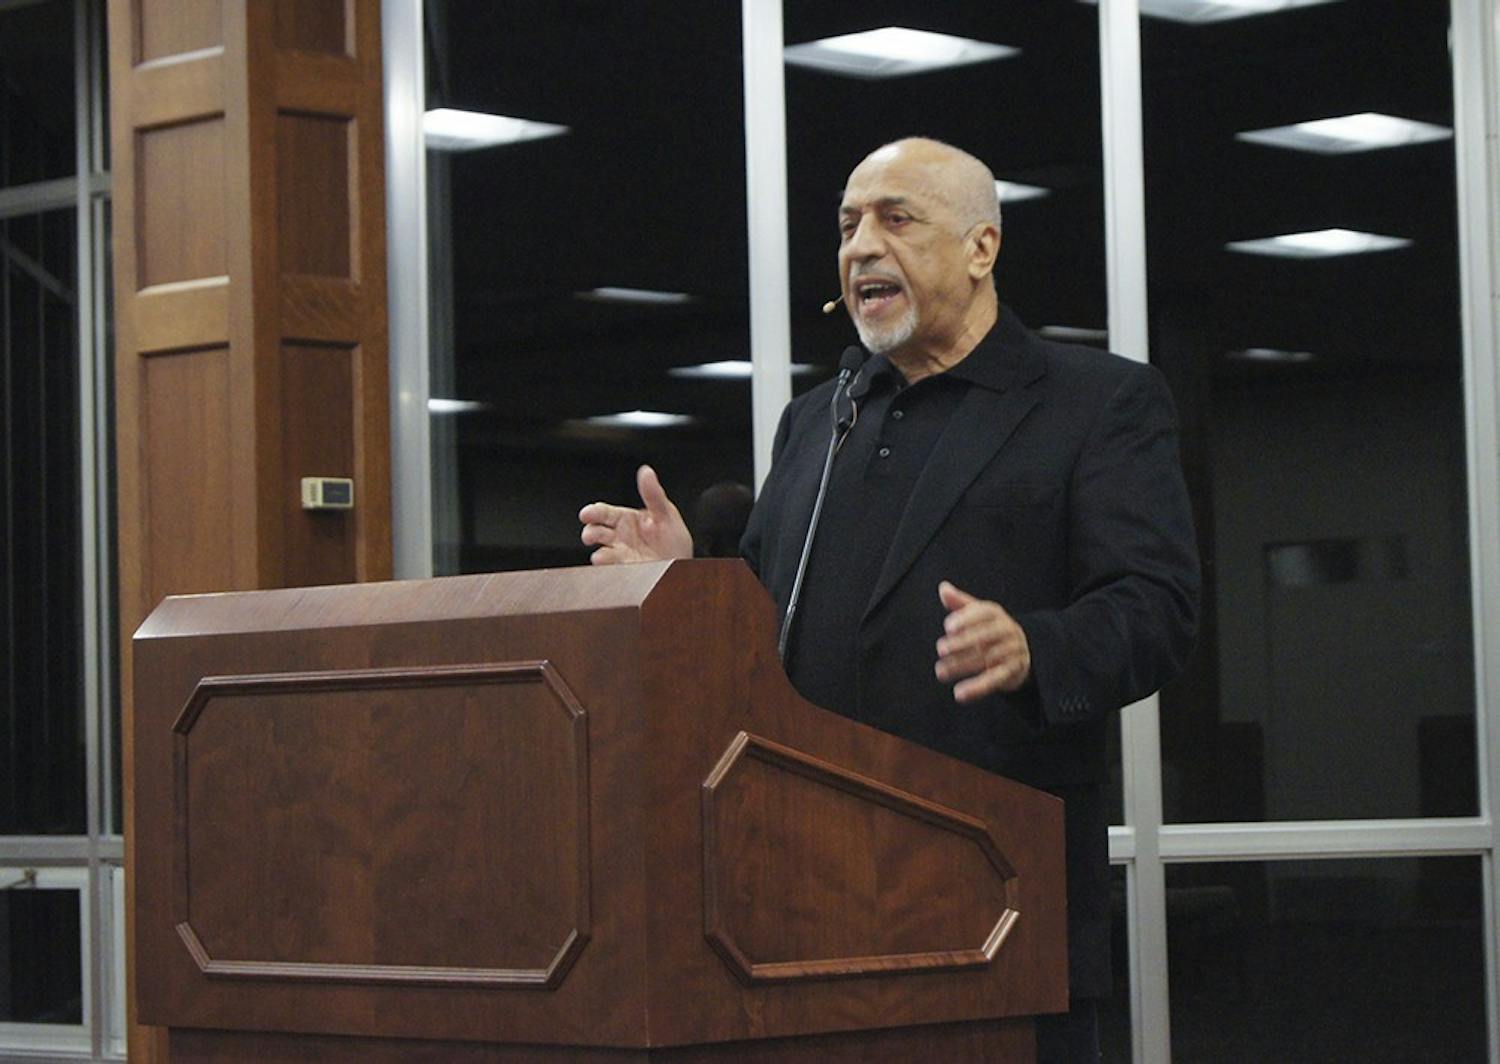 Claud Anderson talks about the relation between race and economics throughout world history Tuesday in the Indiana Memorial Union.